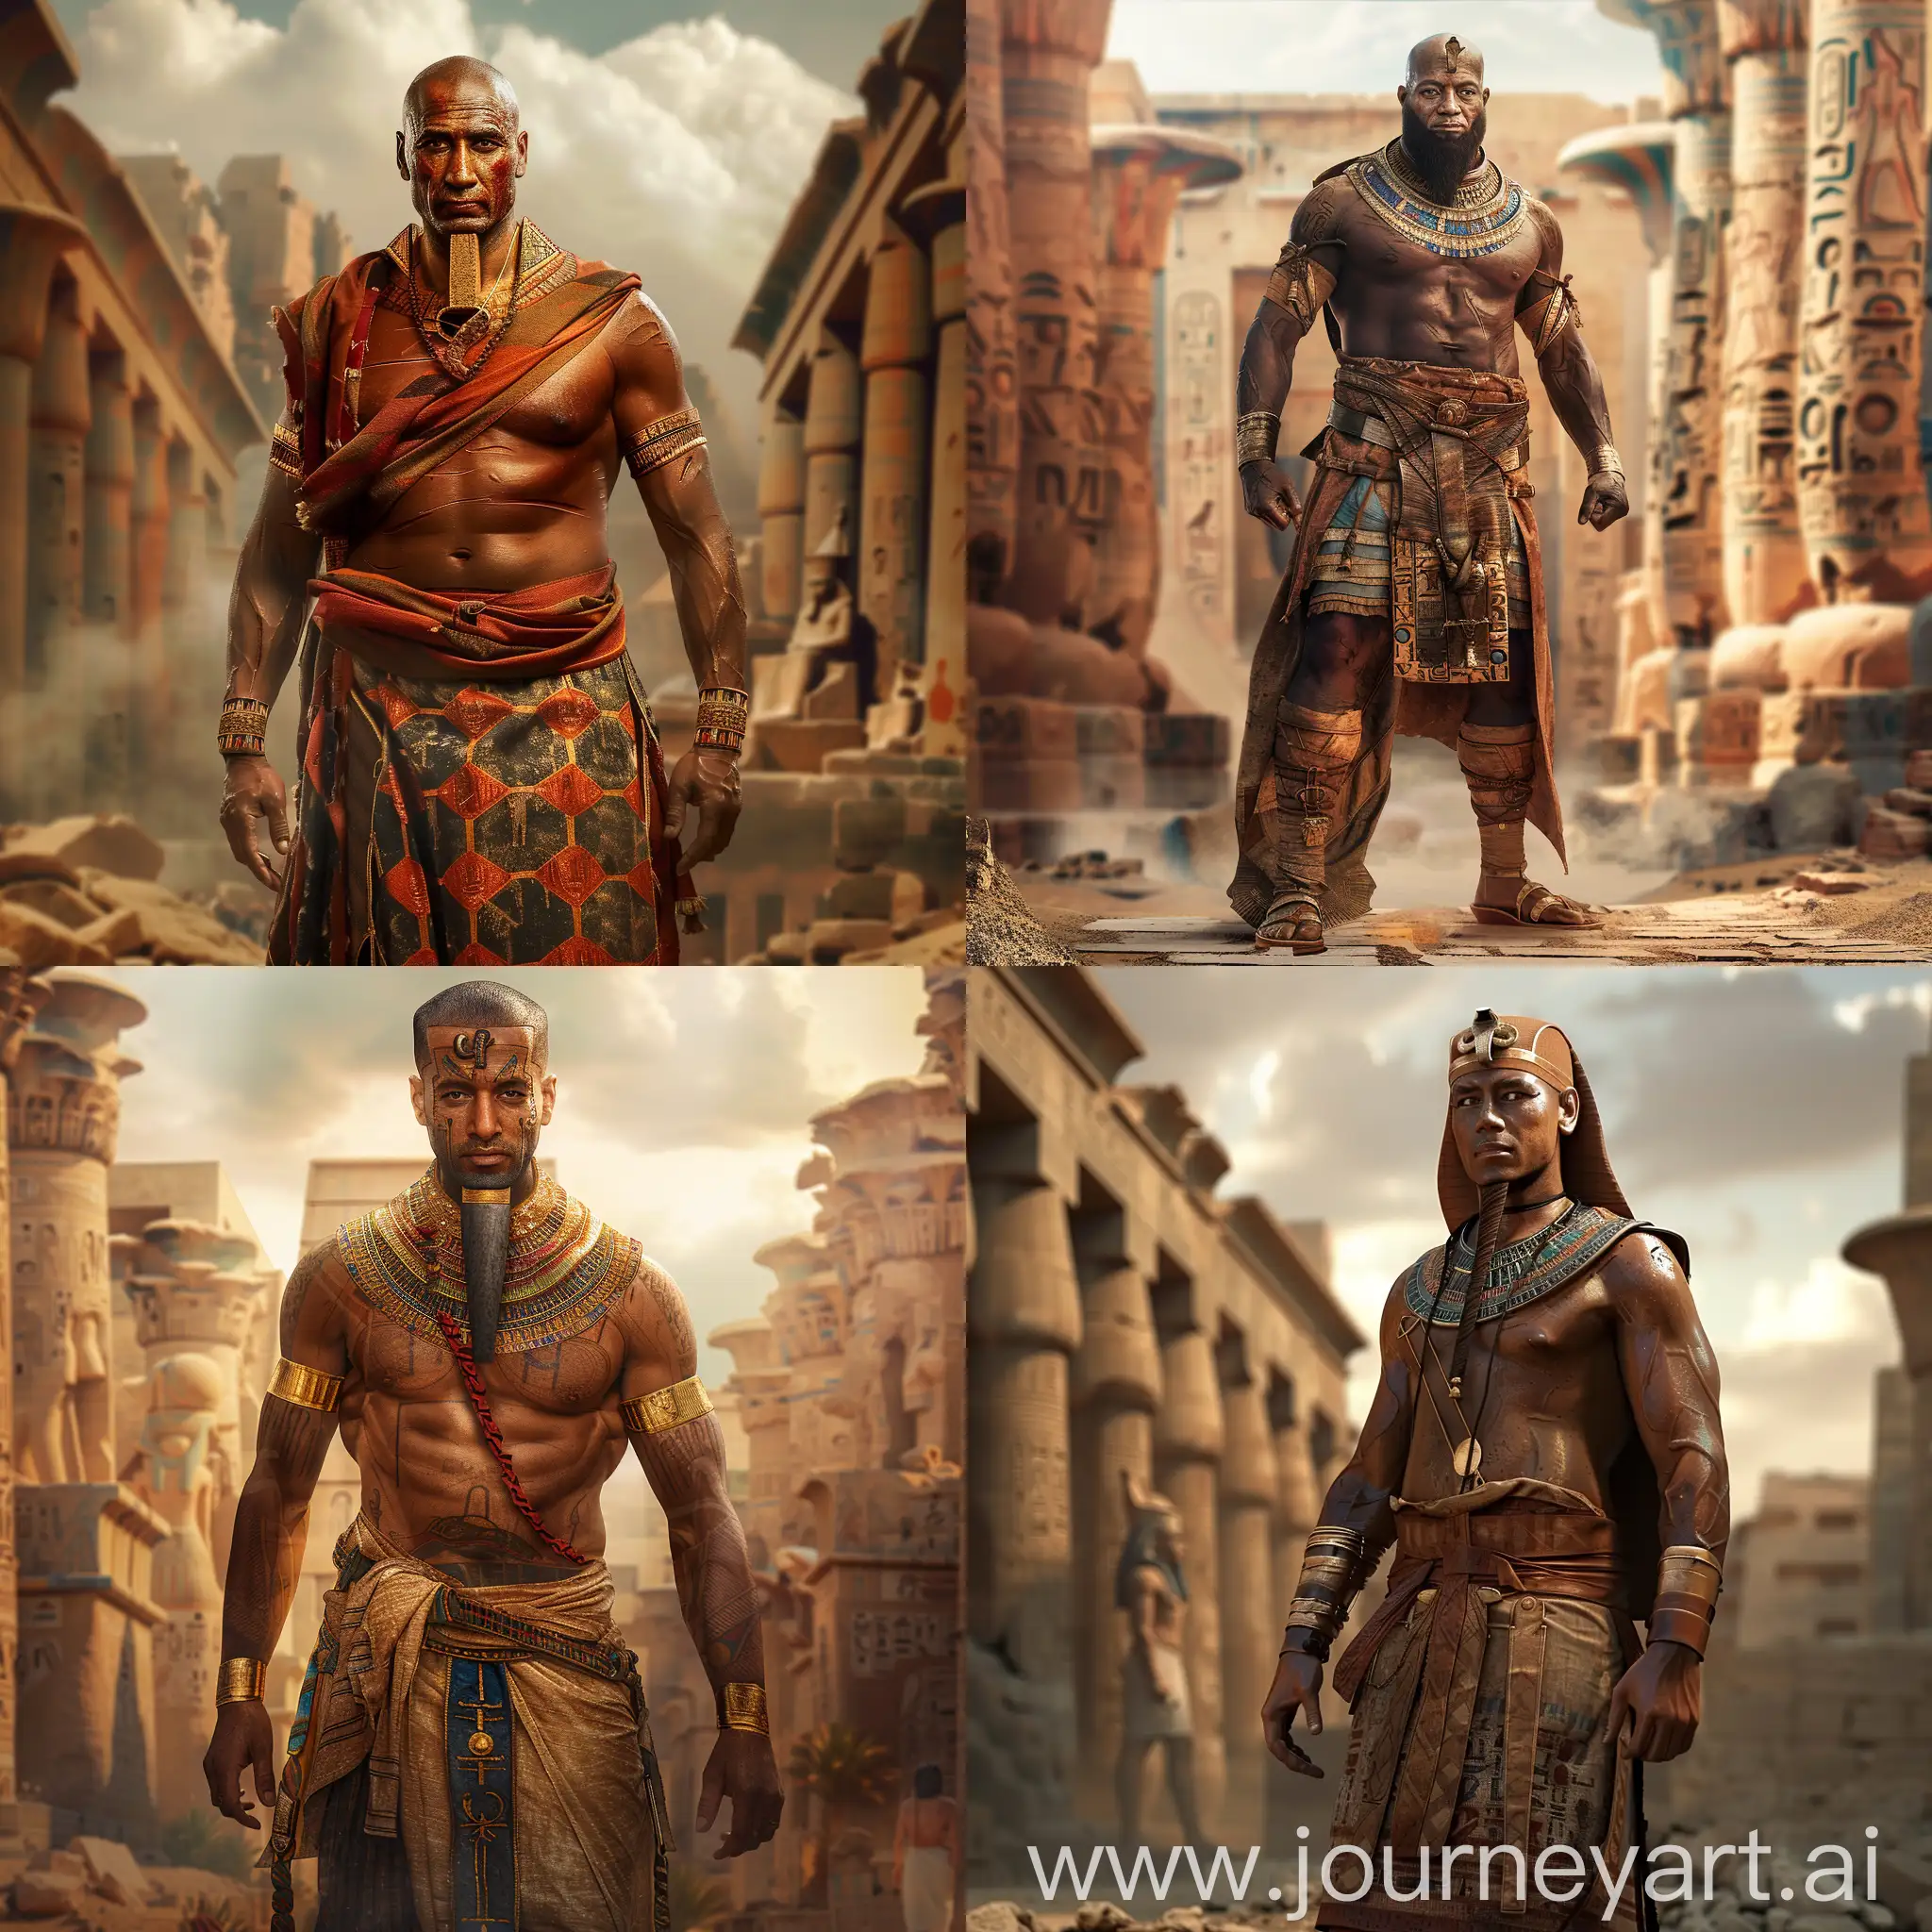 60 years old pharaoh, brown skin, depicted in ancient pharaoh kilt and headdress, shaved face, false pharaoh beard, in ancient egypt city, cinematic lighting, high contrast